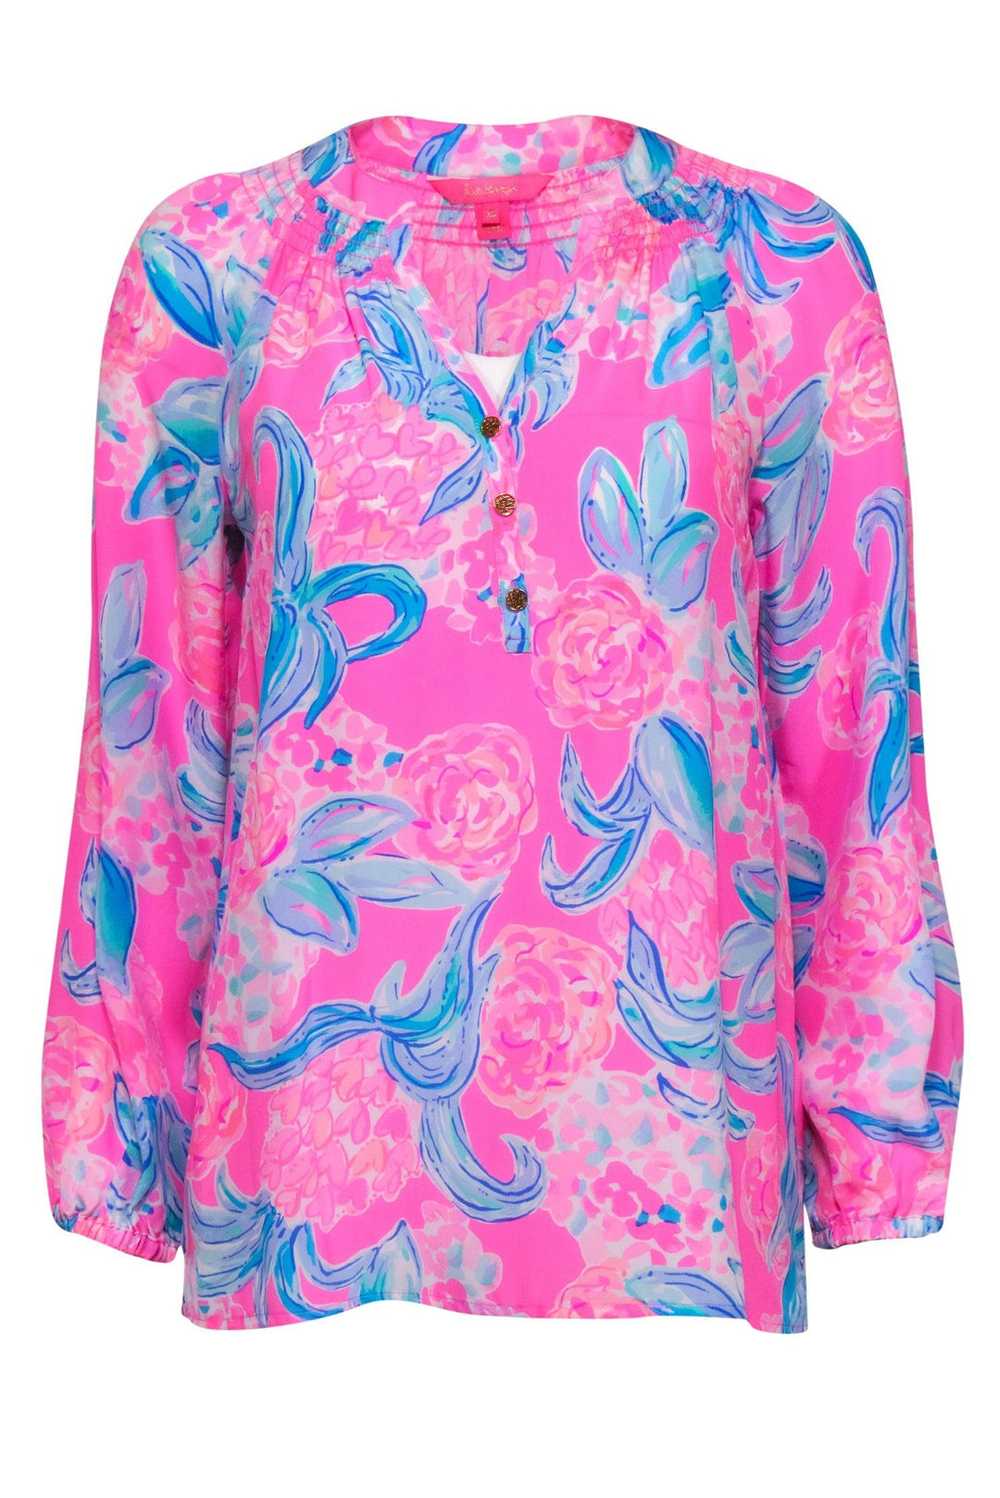 Lilly Pulitzer - Bright Pink & Blue Floral Silk P… - image 1